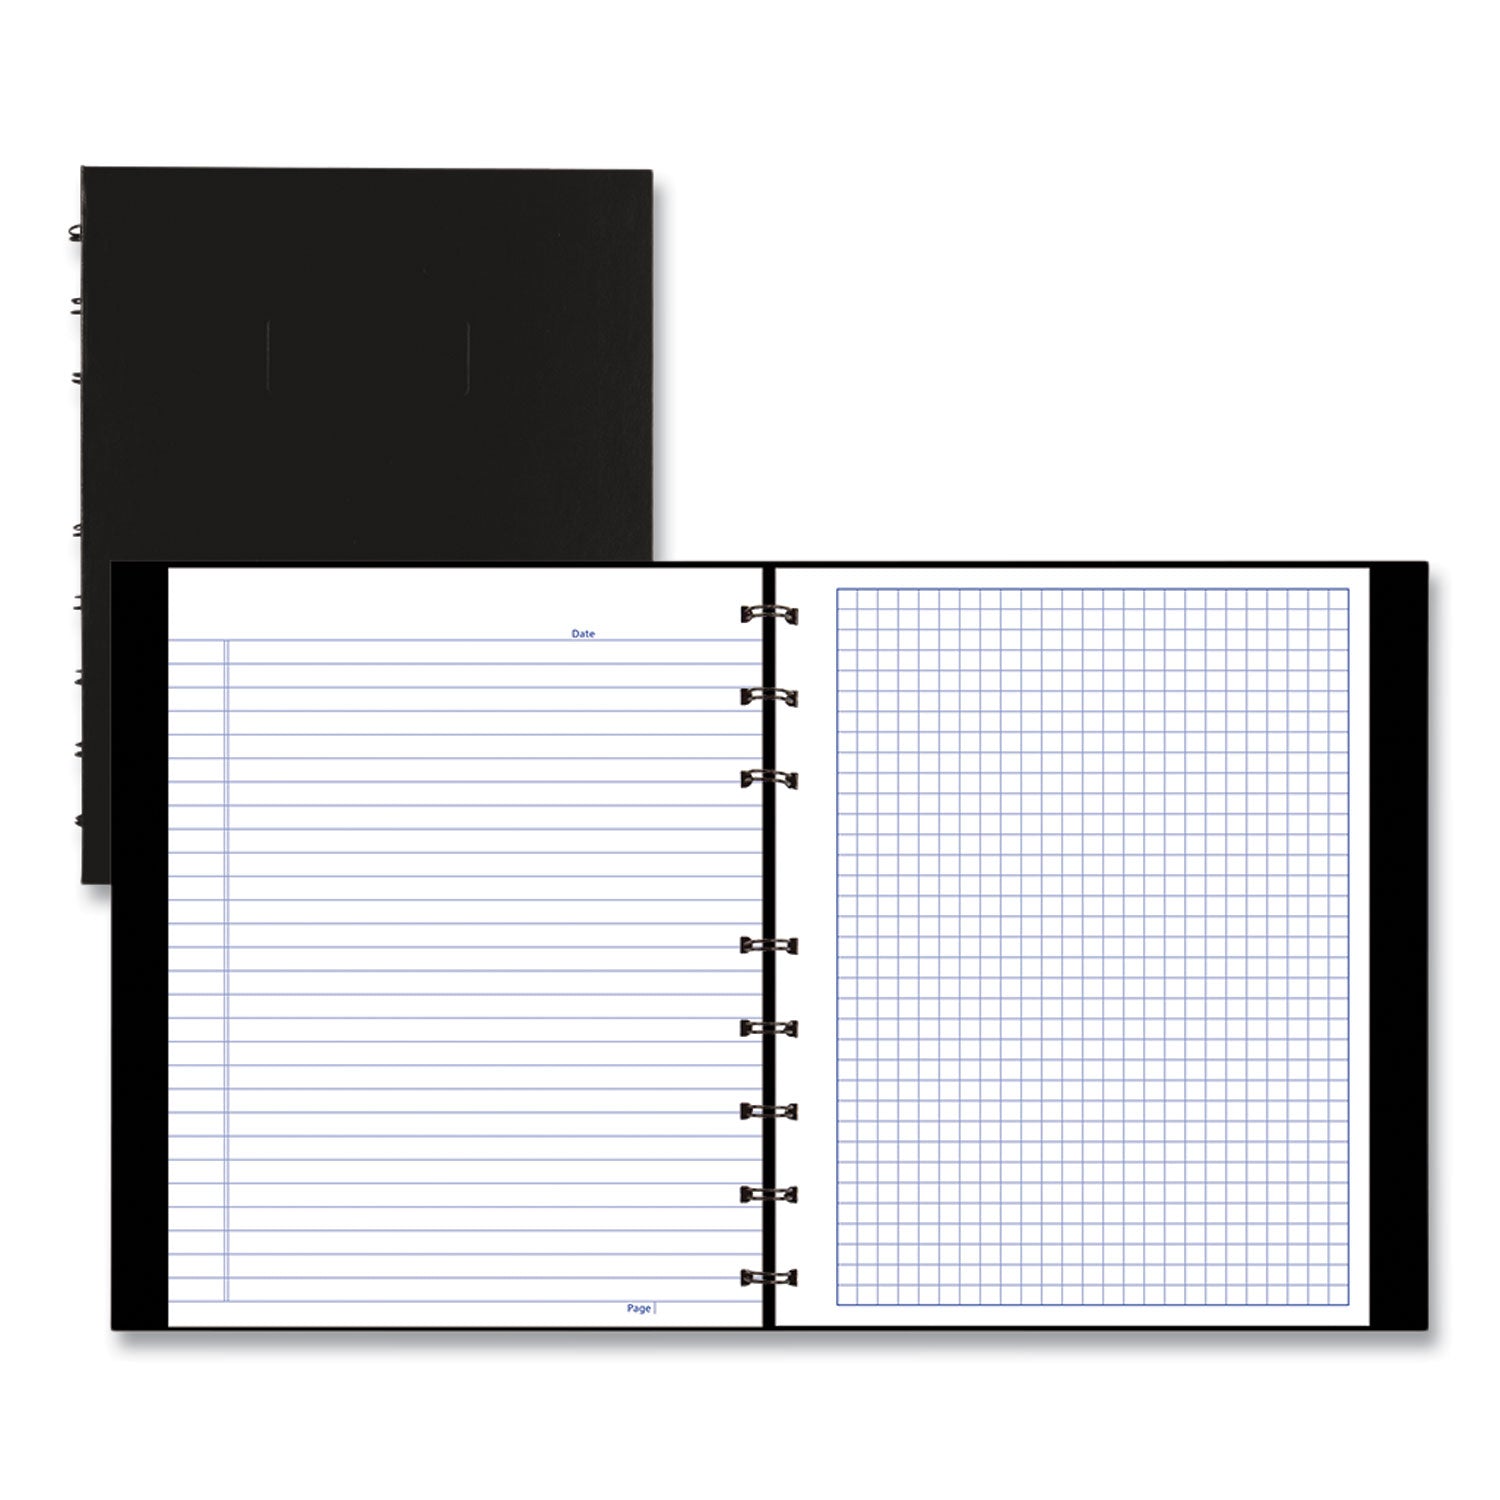 NotePro Quad Notebook, Data/Lab-Record Format with Narrow and Quadrille Rule Sections, Black Cover, (96) 9.25 x 7.25 Sheets - 